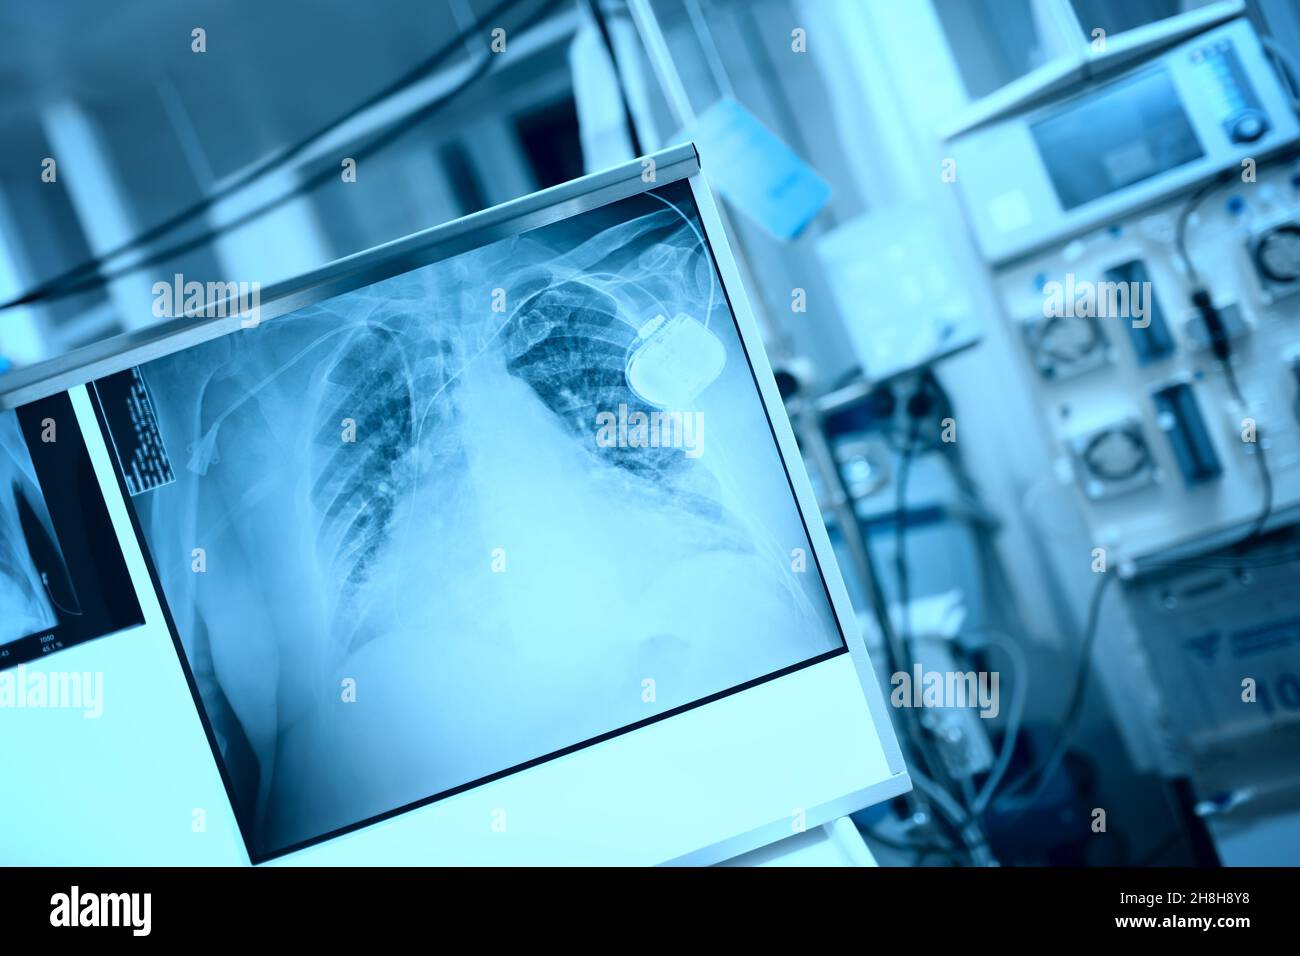 X-ray film on the light board in the equipped medical room. Stock Photo